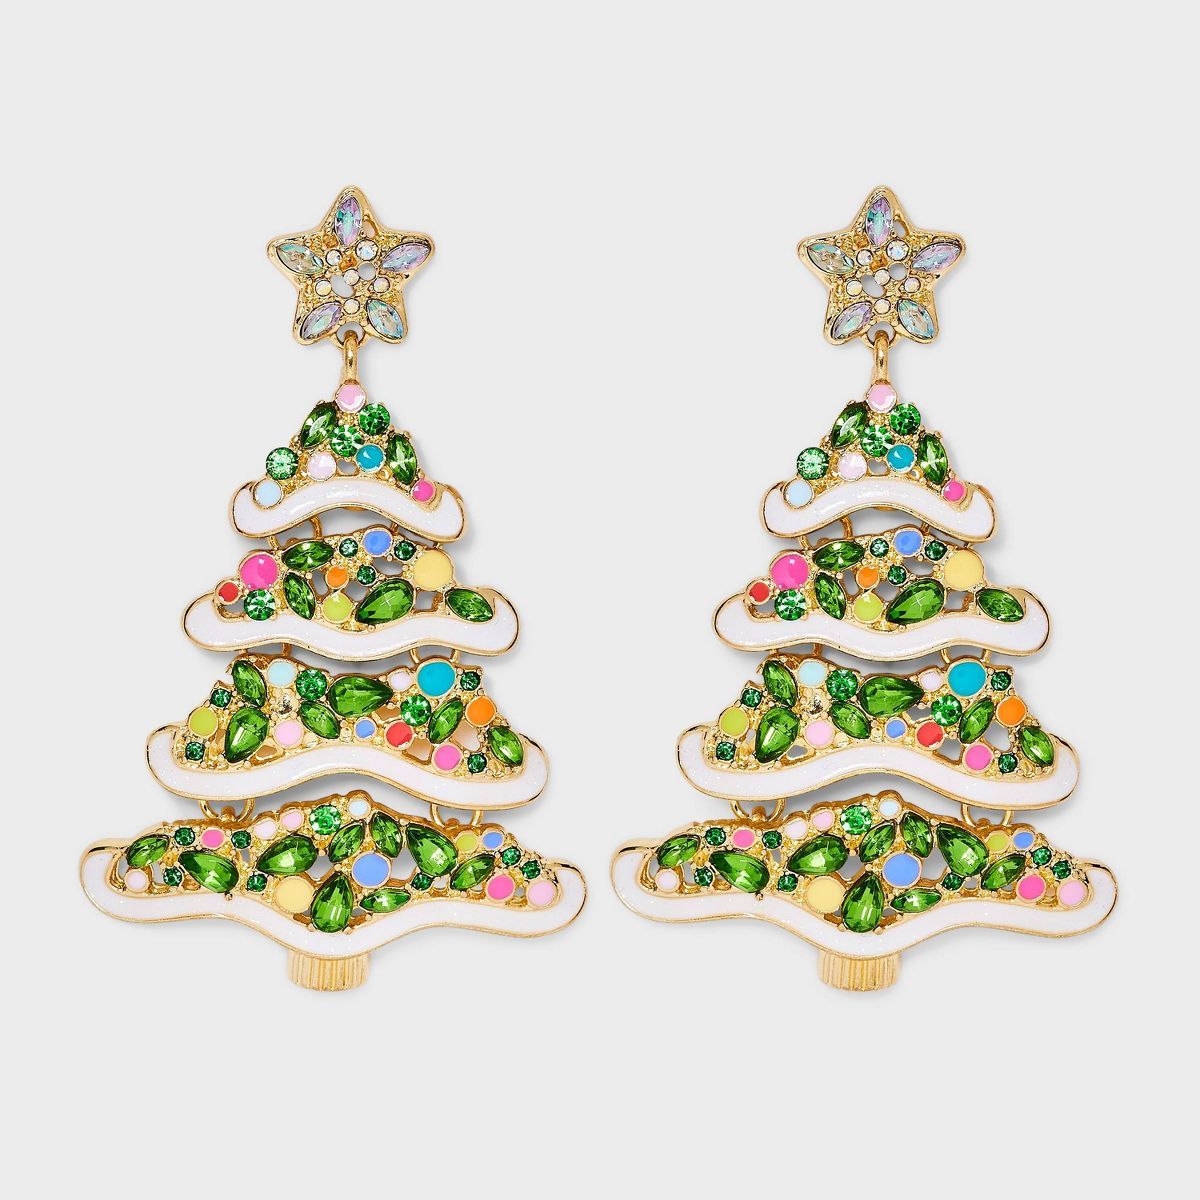 SUGARFIX by BaubleBar "Pining for You" Statement Earrings - Green | Target